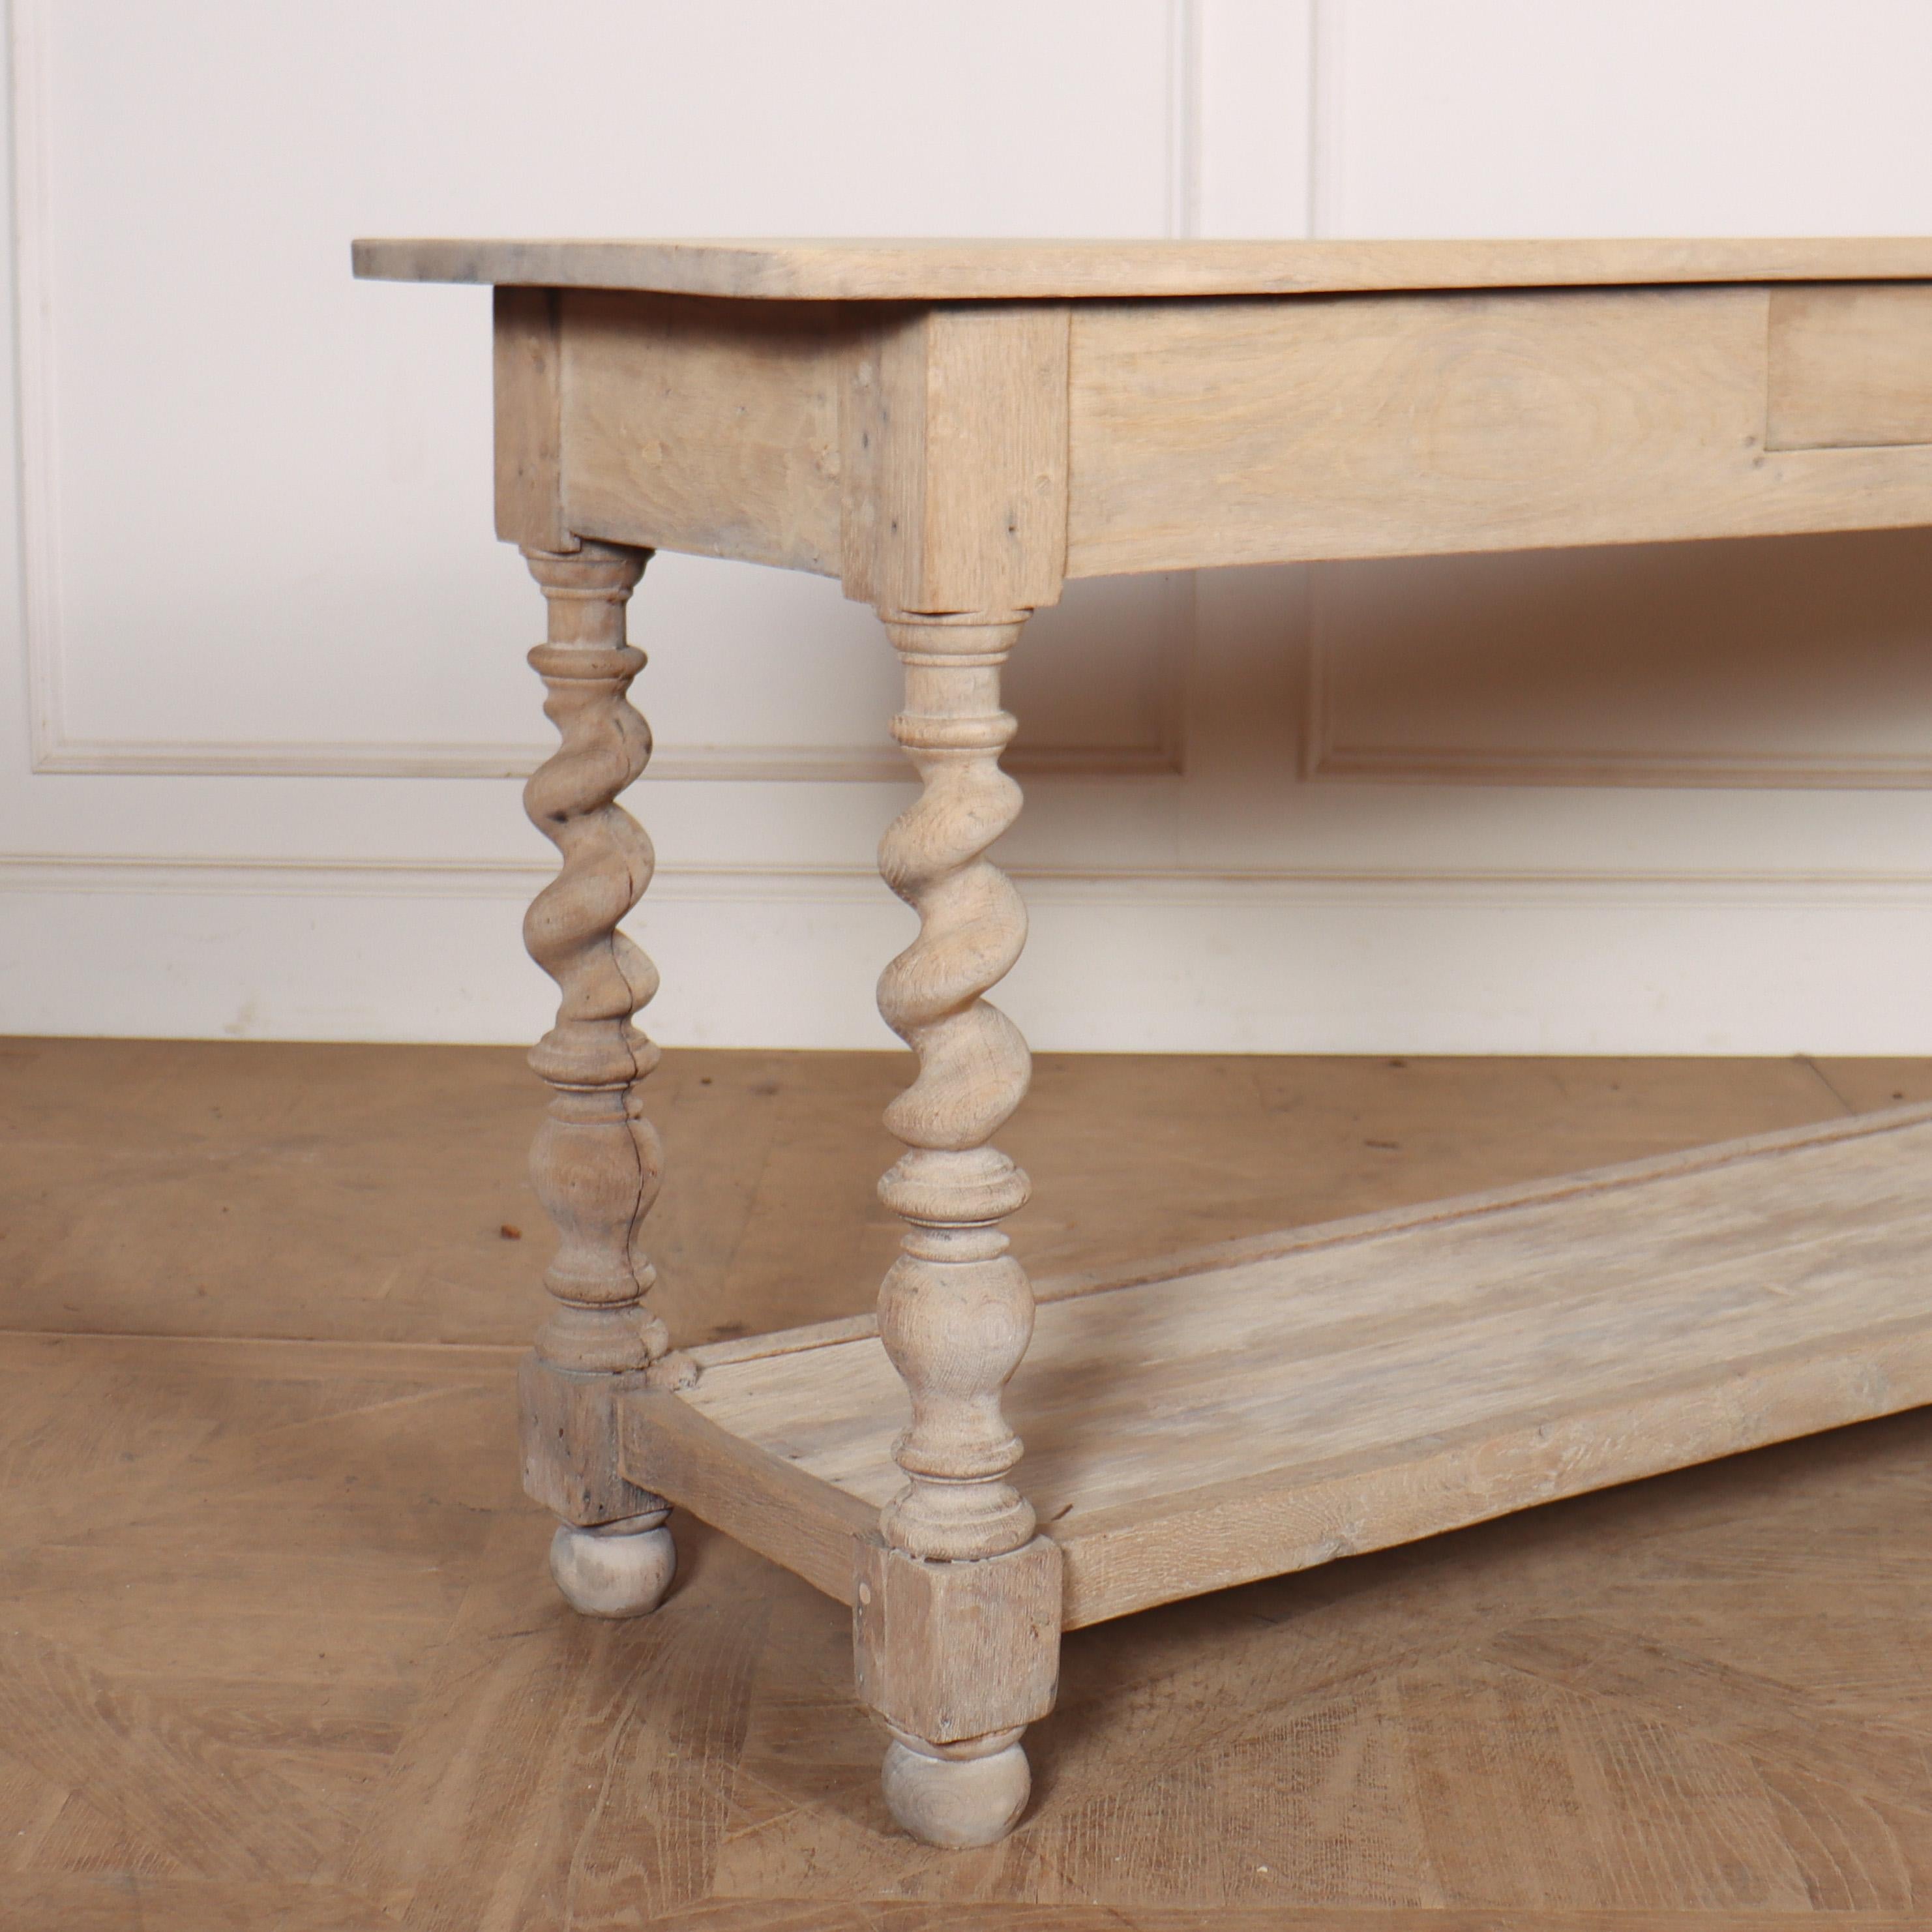 19th C French bleached oak drapers style console table. 1860.

Reference: 8088

Dimensions
71.5 inches (182 cms) Wide
17.5 inches (44 cms) Deep
29.5 inches (75 cms) High